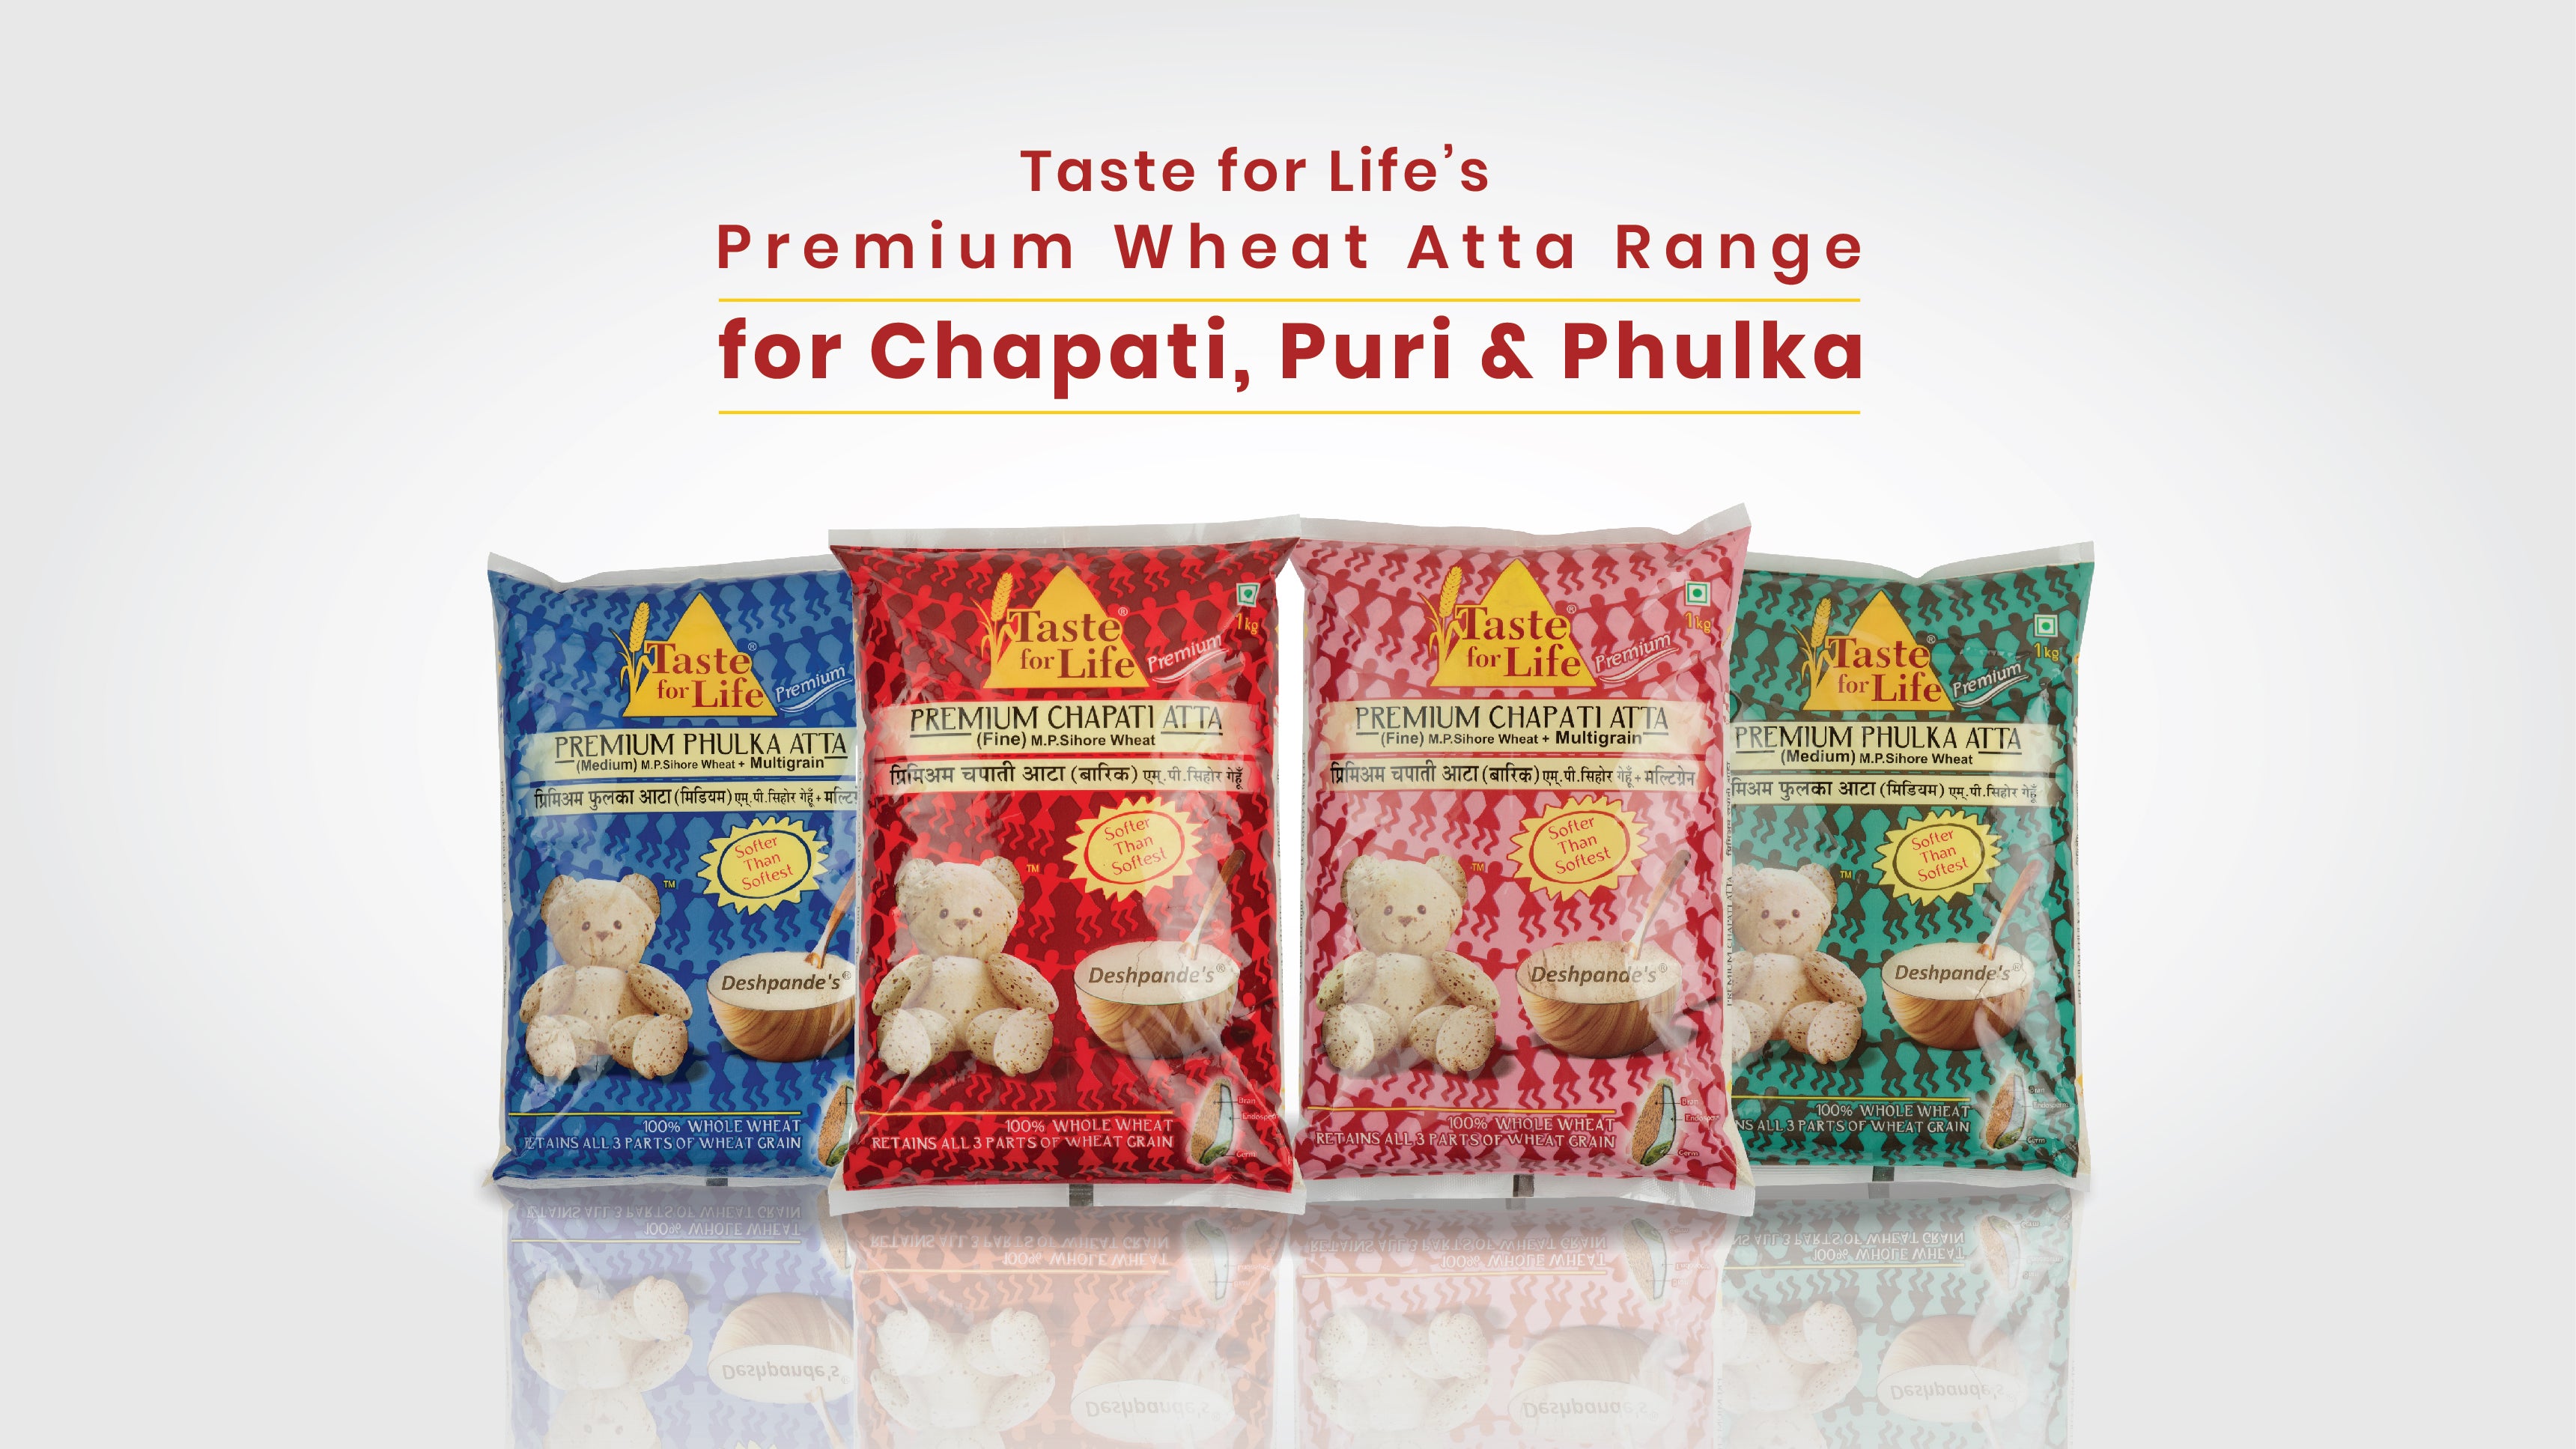 Taste for Life’s Authentic Atta Range for crafting Chapati, Puri, and Phulka!